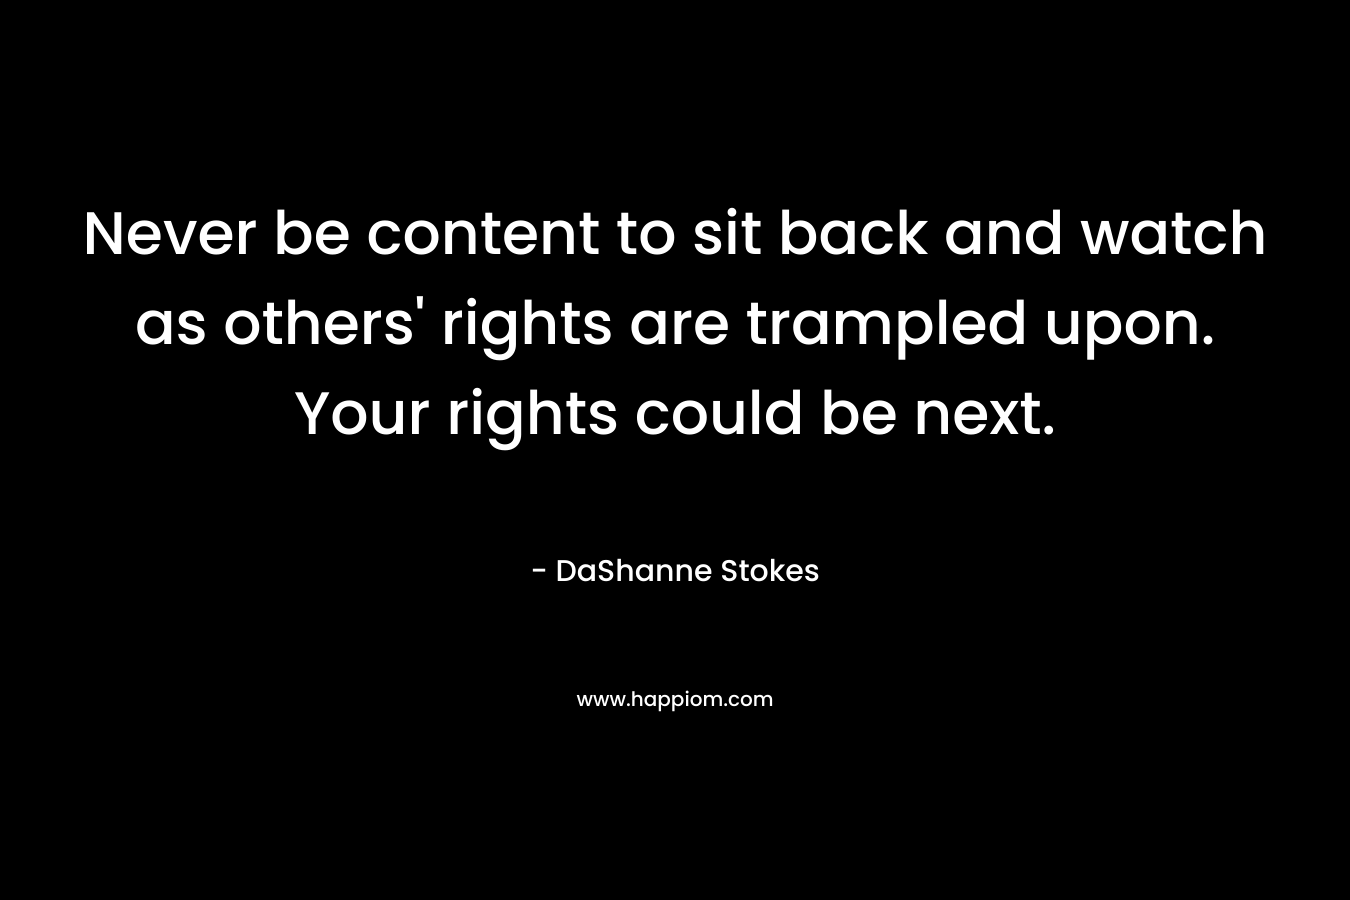 Never be content to sit back and watch as others’ rights are trampled upon. Your rights could be next. – DaShanne Stokes